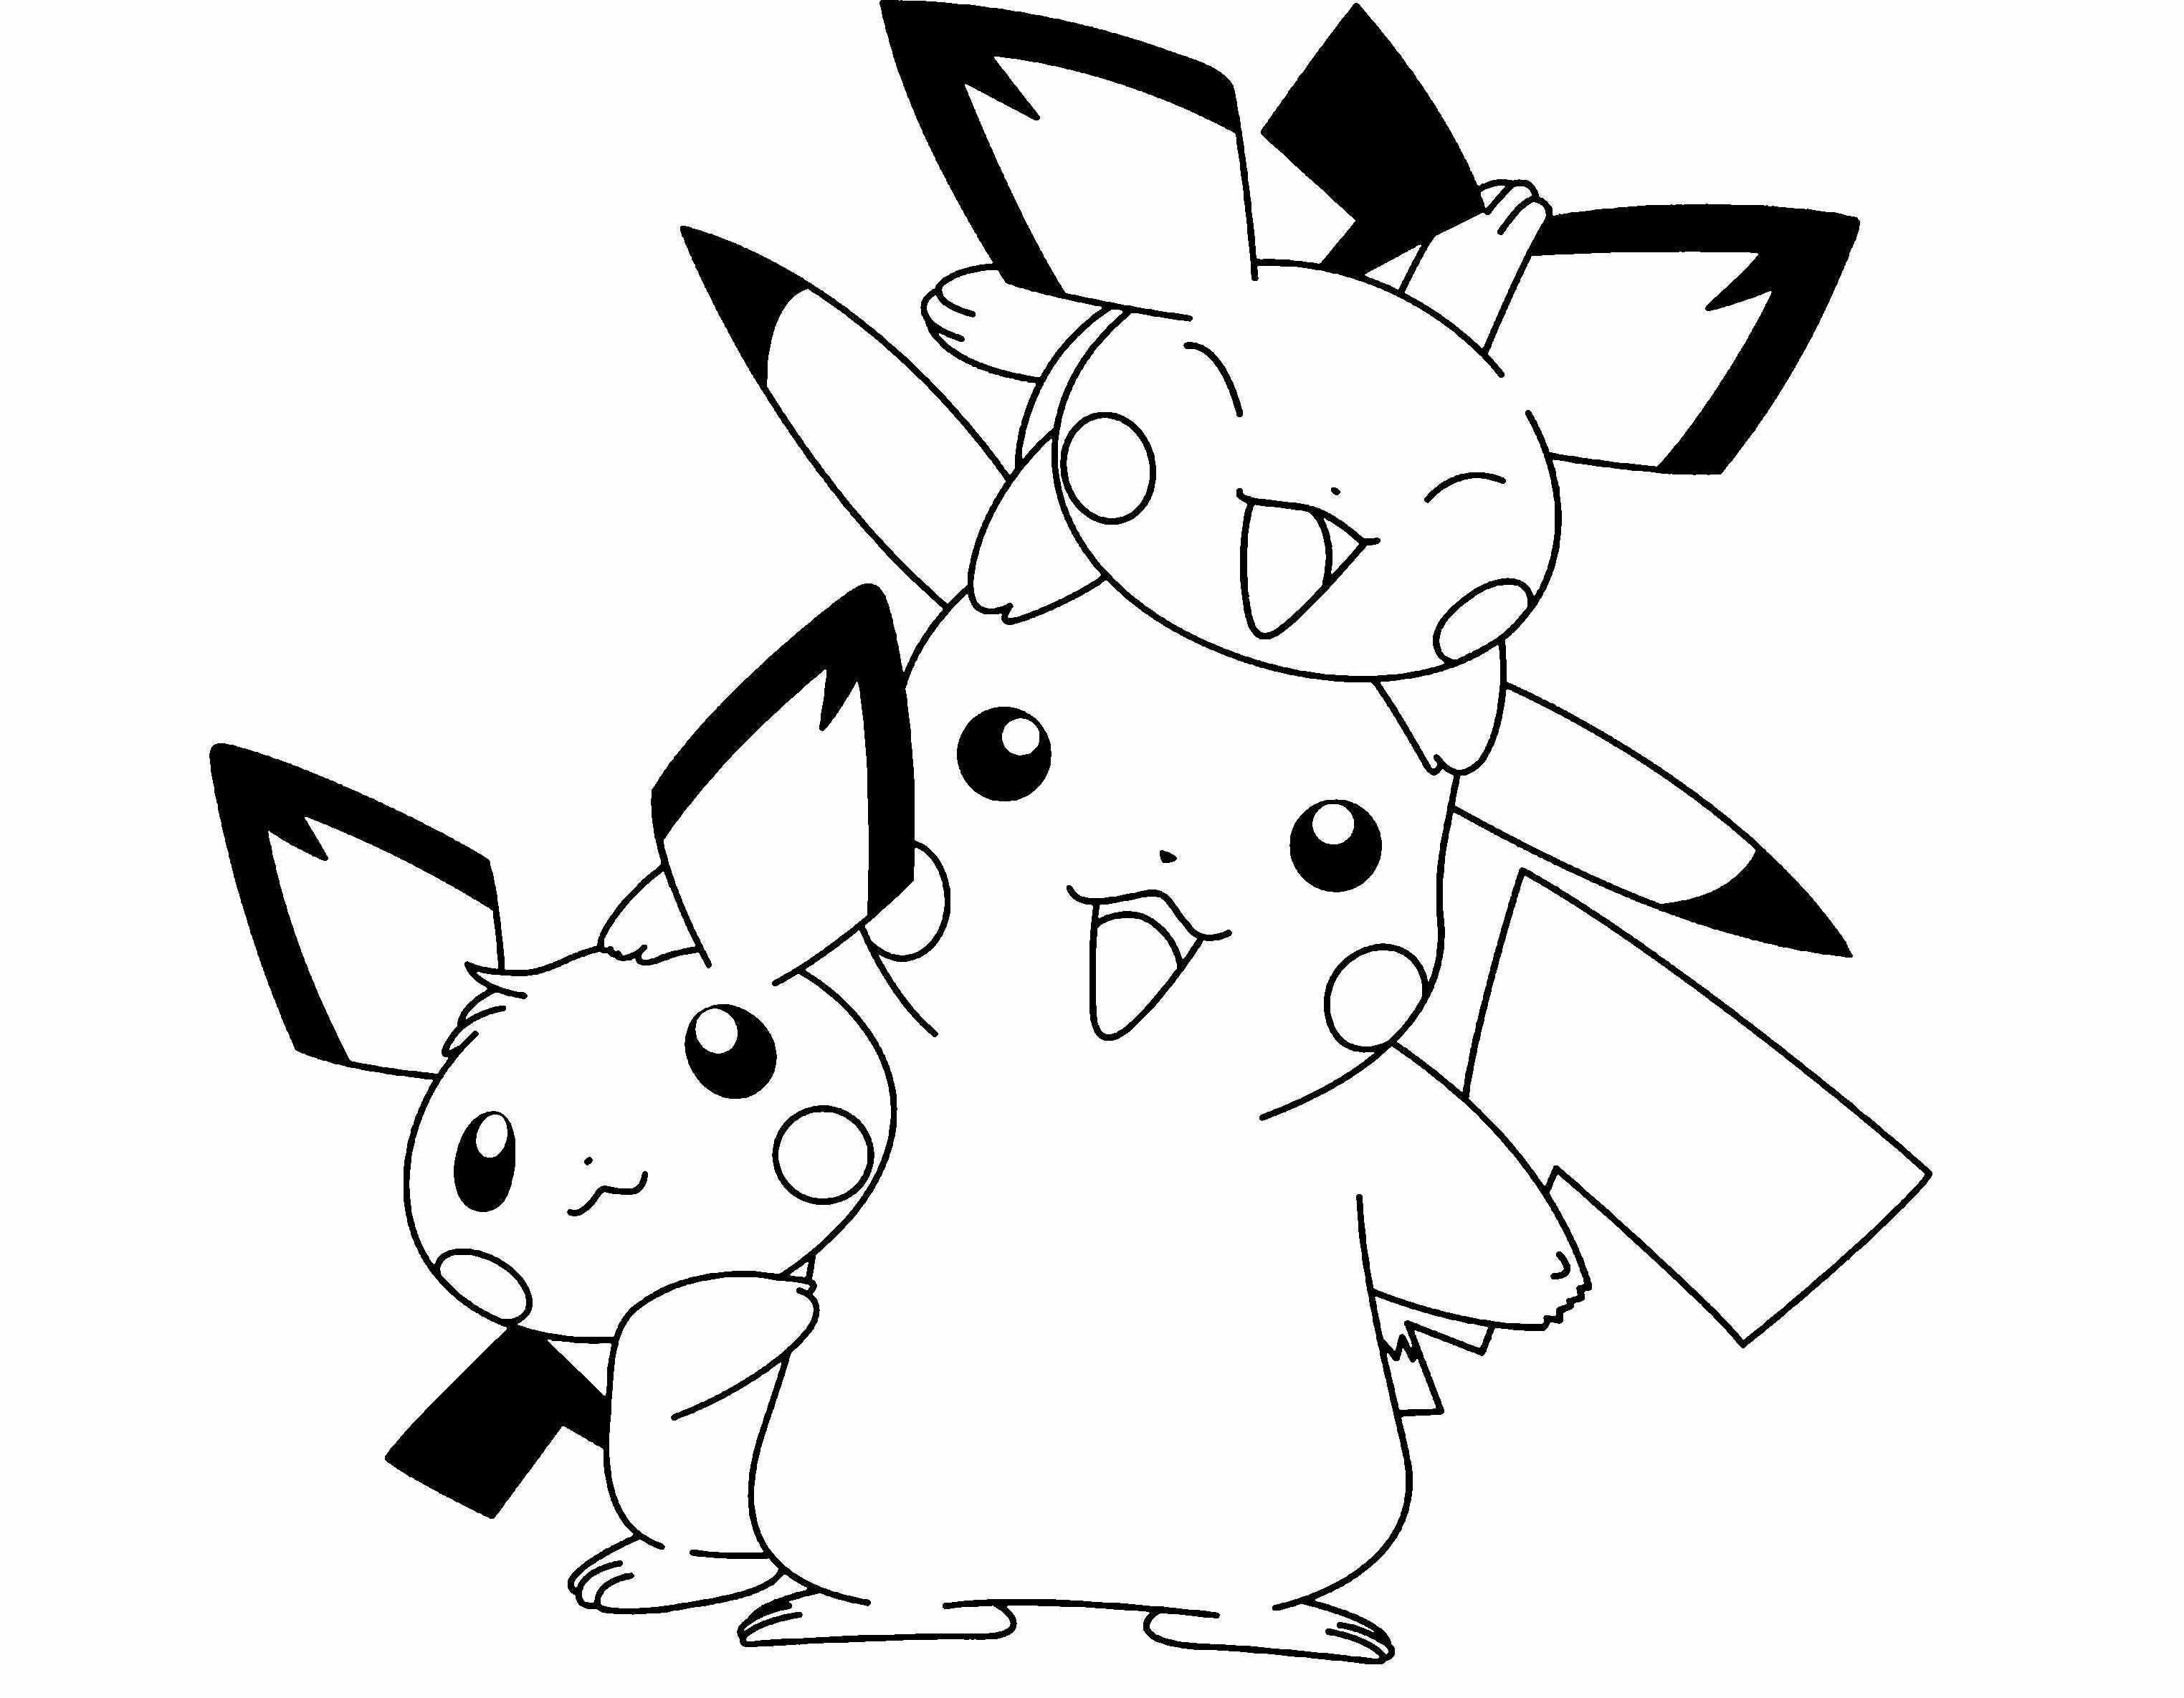 Pichu Pikachu Raichu Coloring Pages From The Thousand Pictures On The Net About Pichu